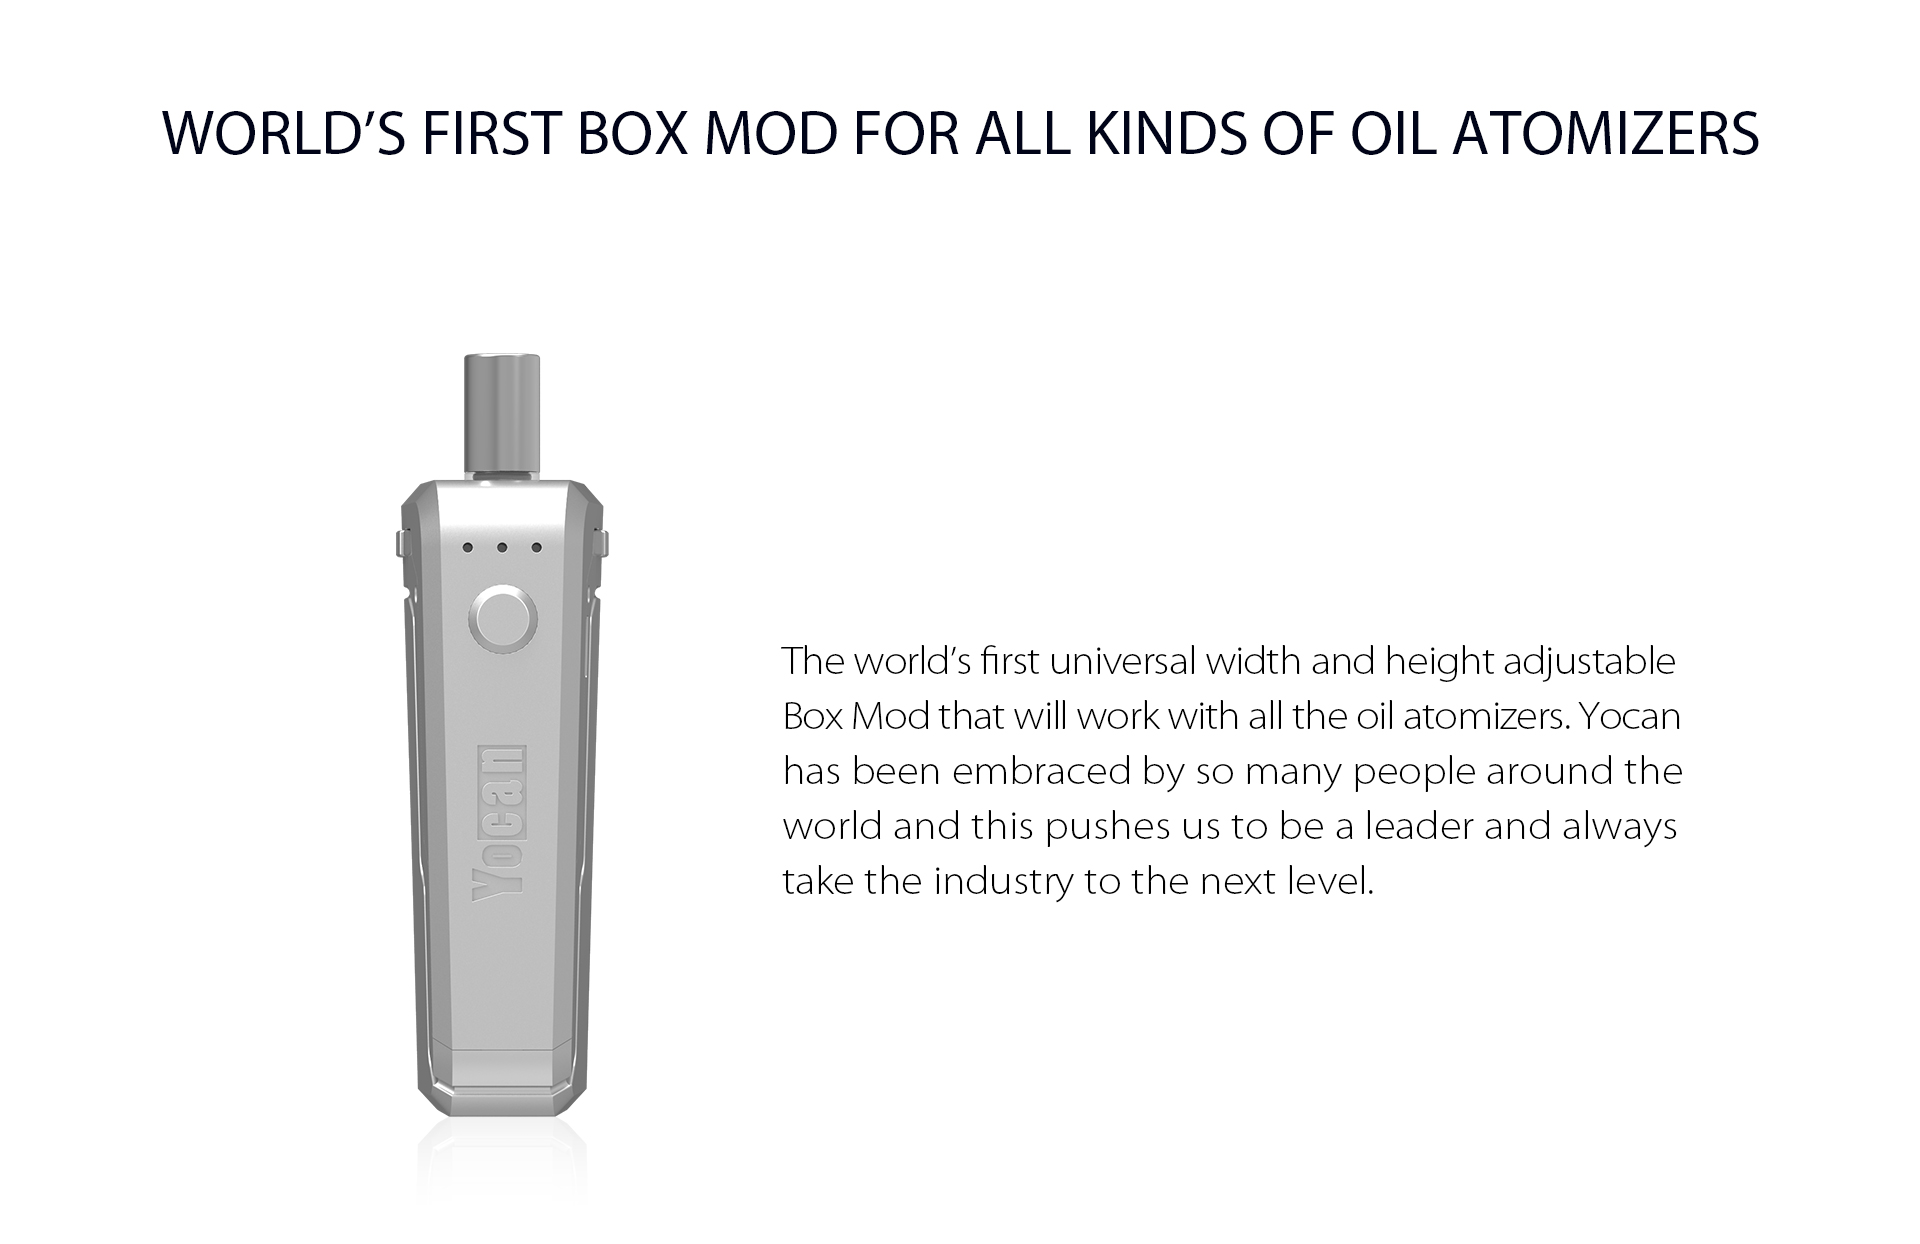 Yocan UNI world's first box mod for all kinds of oil atomizers